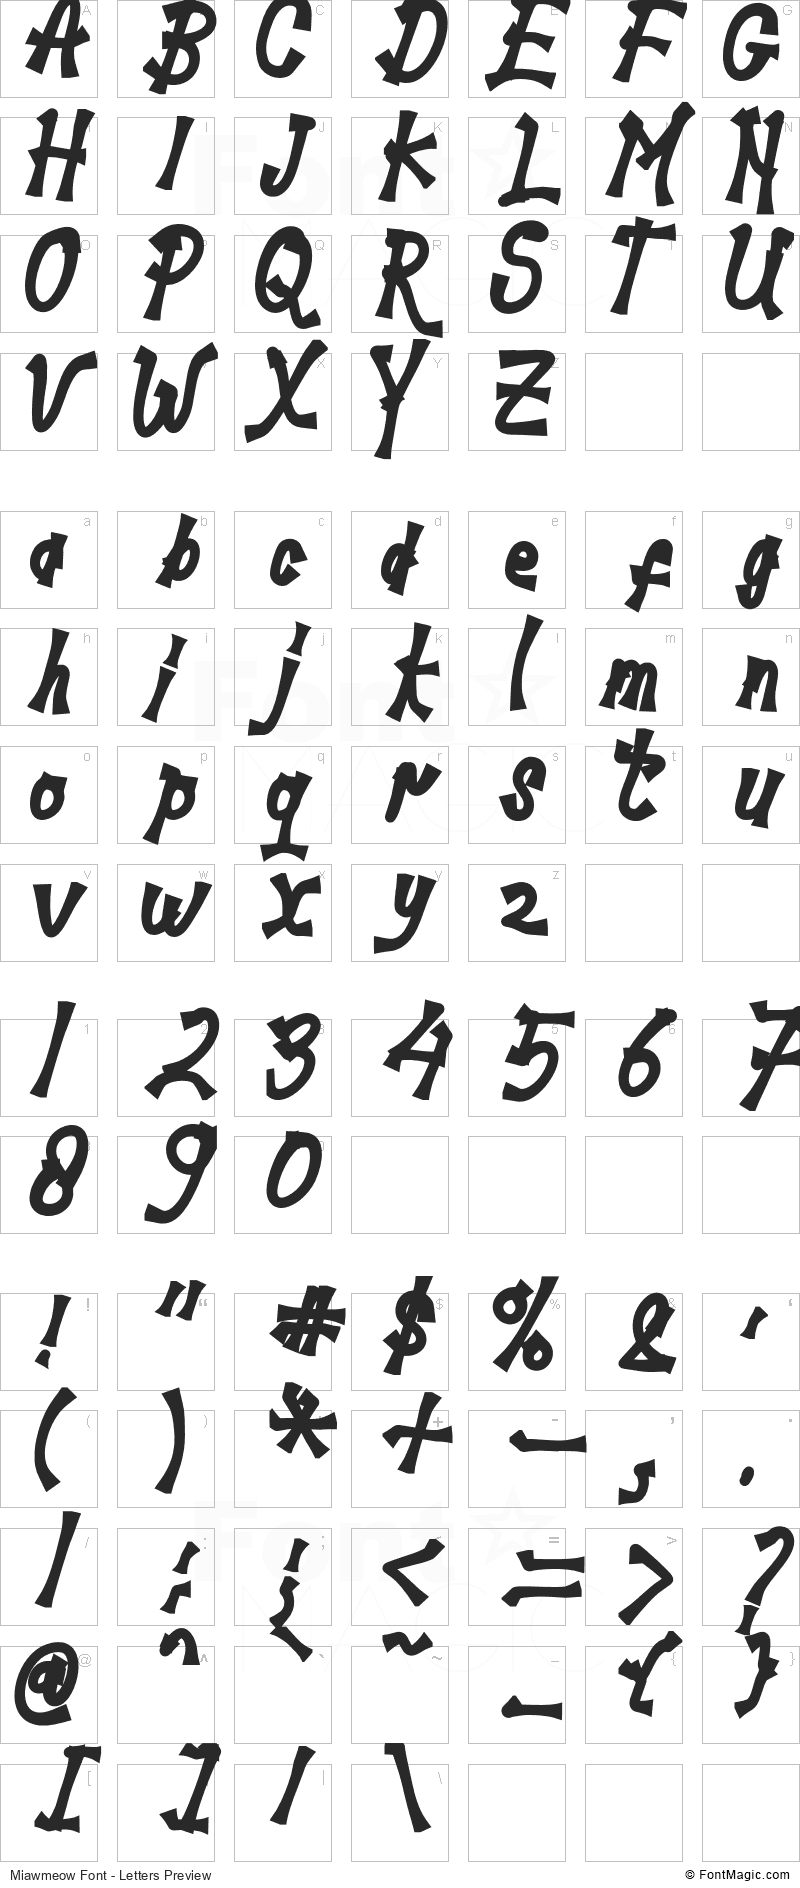 Miawmeow Font - All Latters Preview Chart